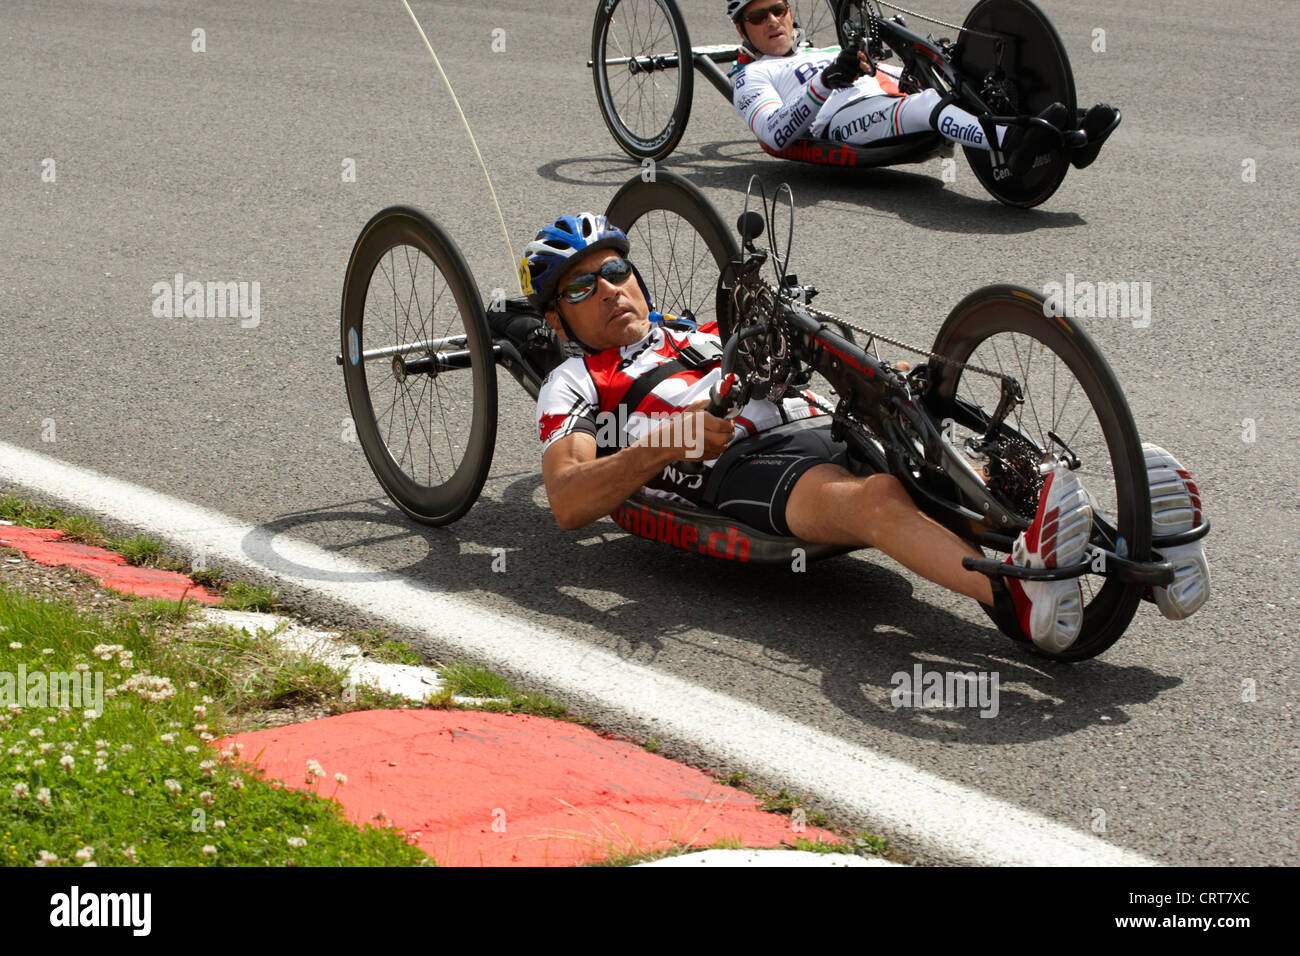 Paralymics London 2012. Pre games paracycling training day at Brands Hatch motor racing circuit, Kent. Stock Photo